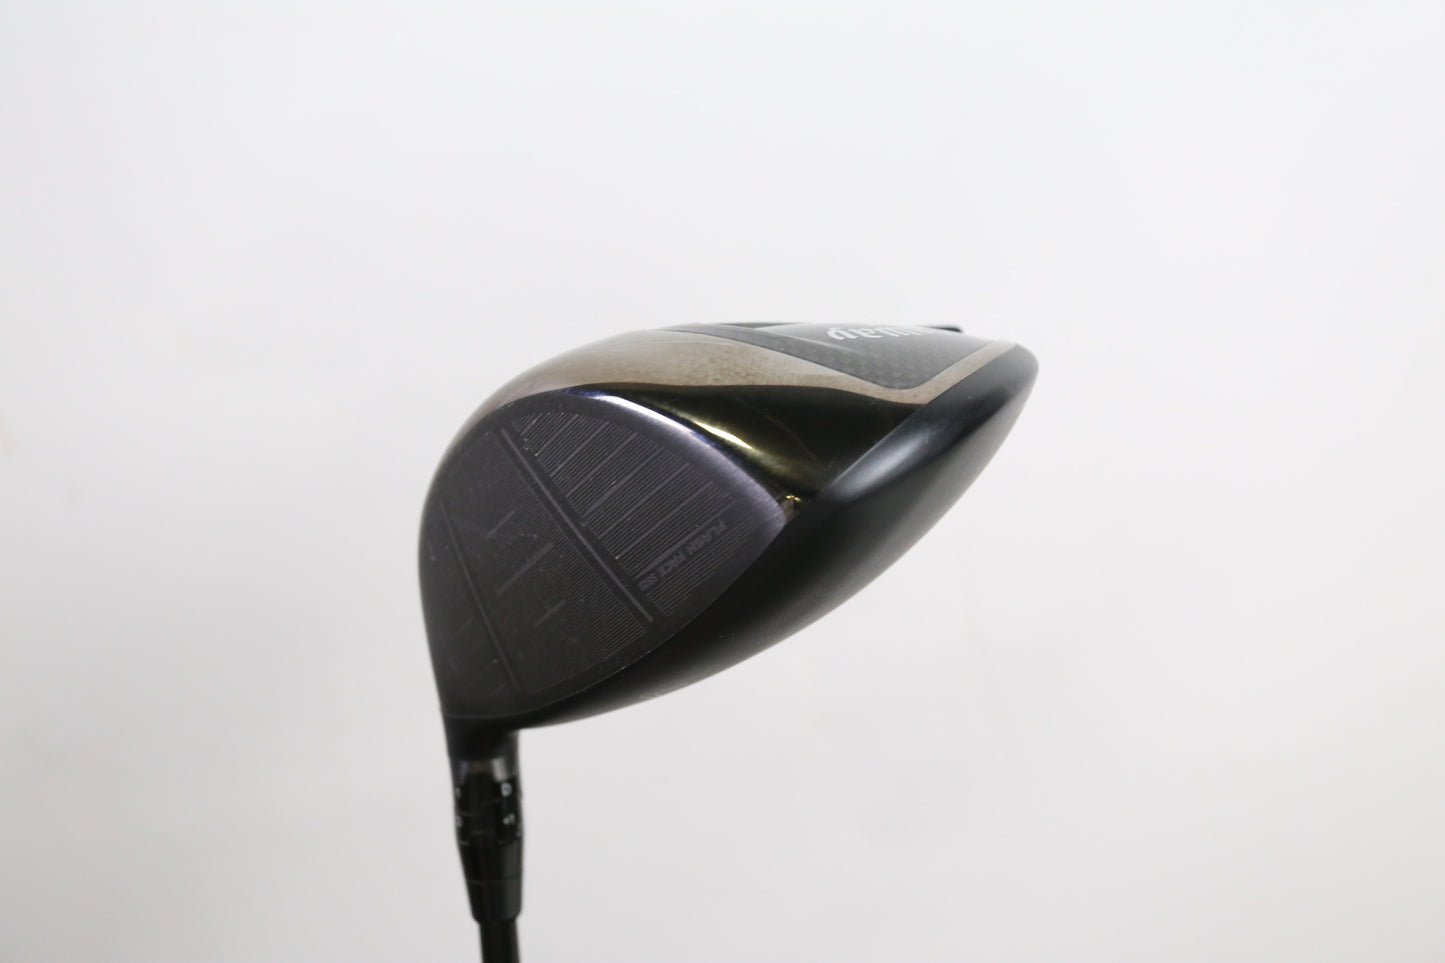 Used Callaway Rogue ST MAX LS Driver - Right-Handed - 9 Degrees - Stiff Flex